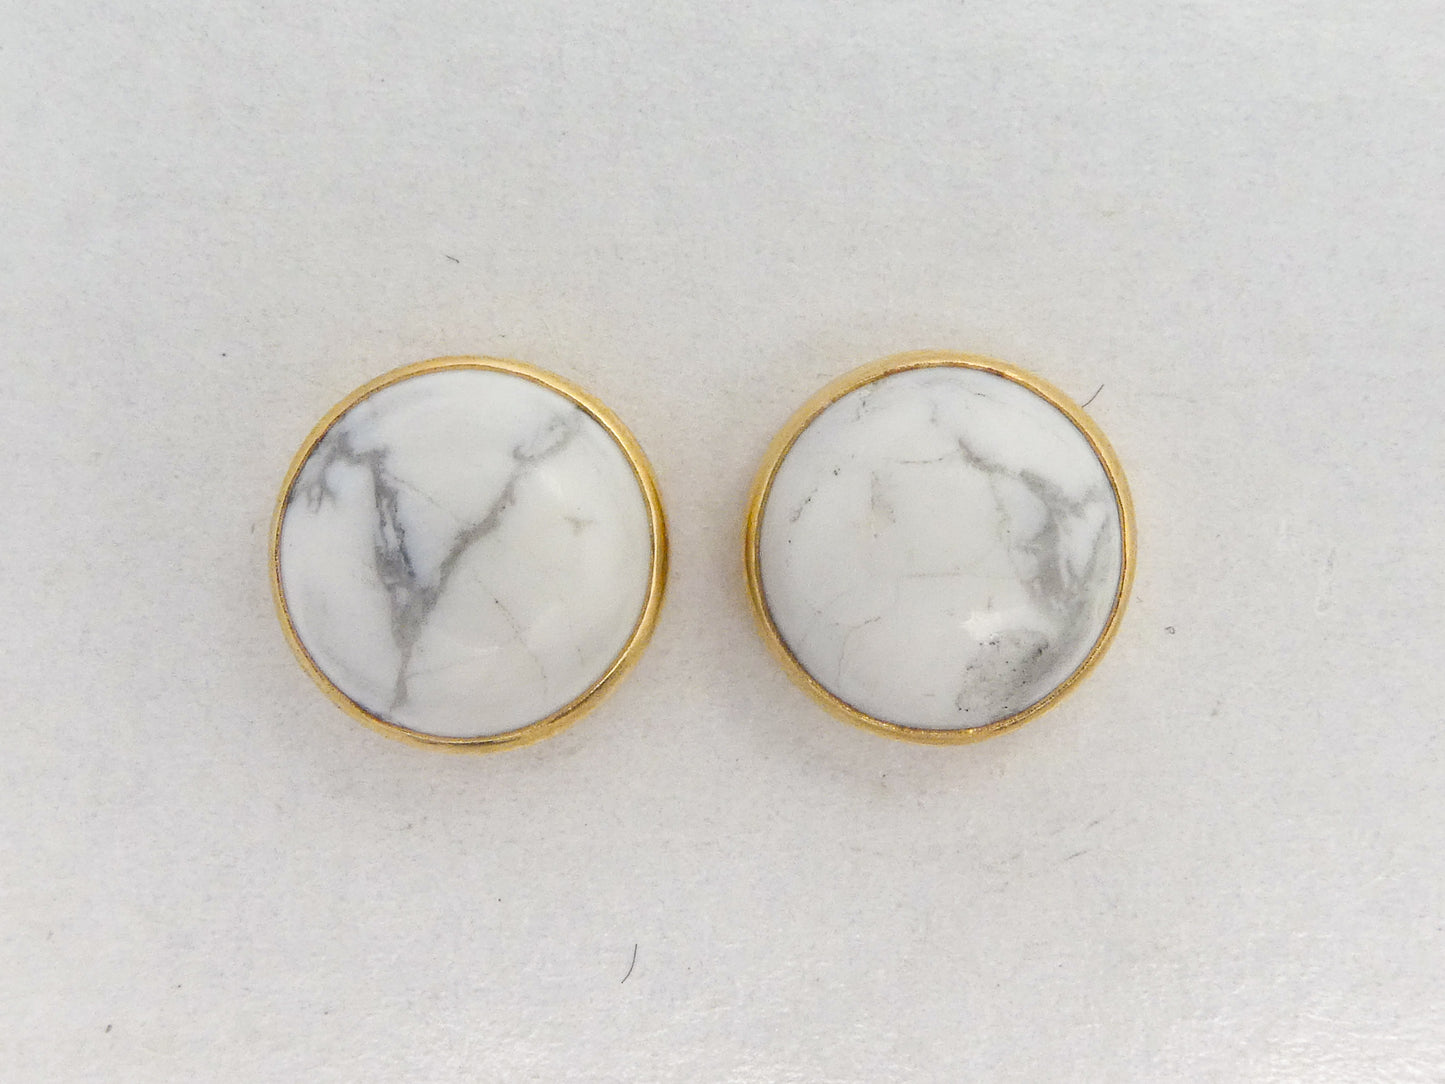 White Howlite and 14k Gold Bezel Studs - 8mm round earrings with white and grey marbled gemstone cabochons